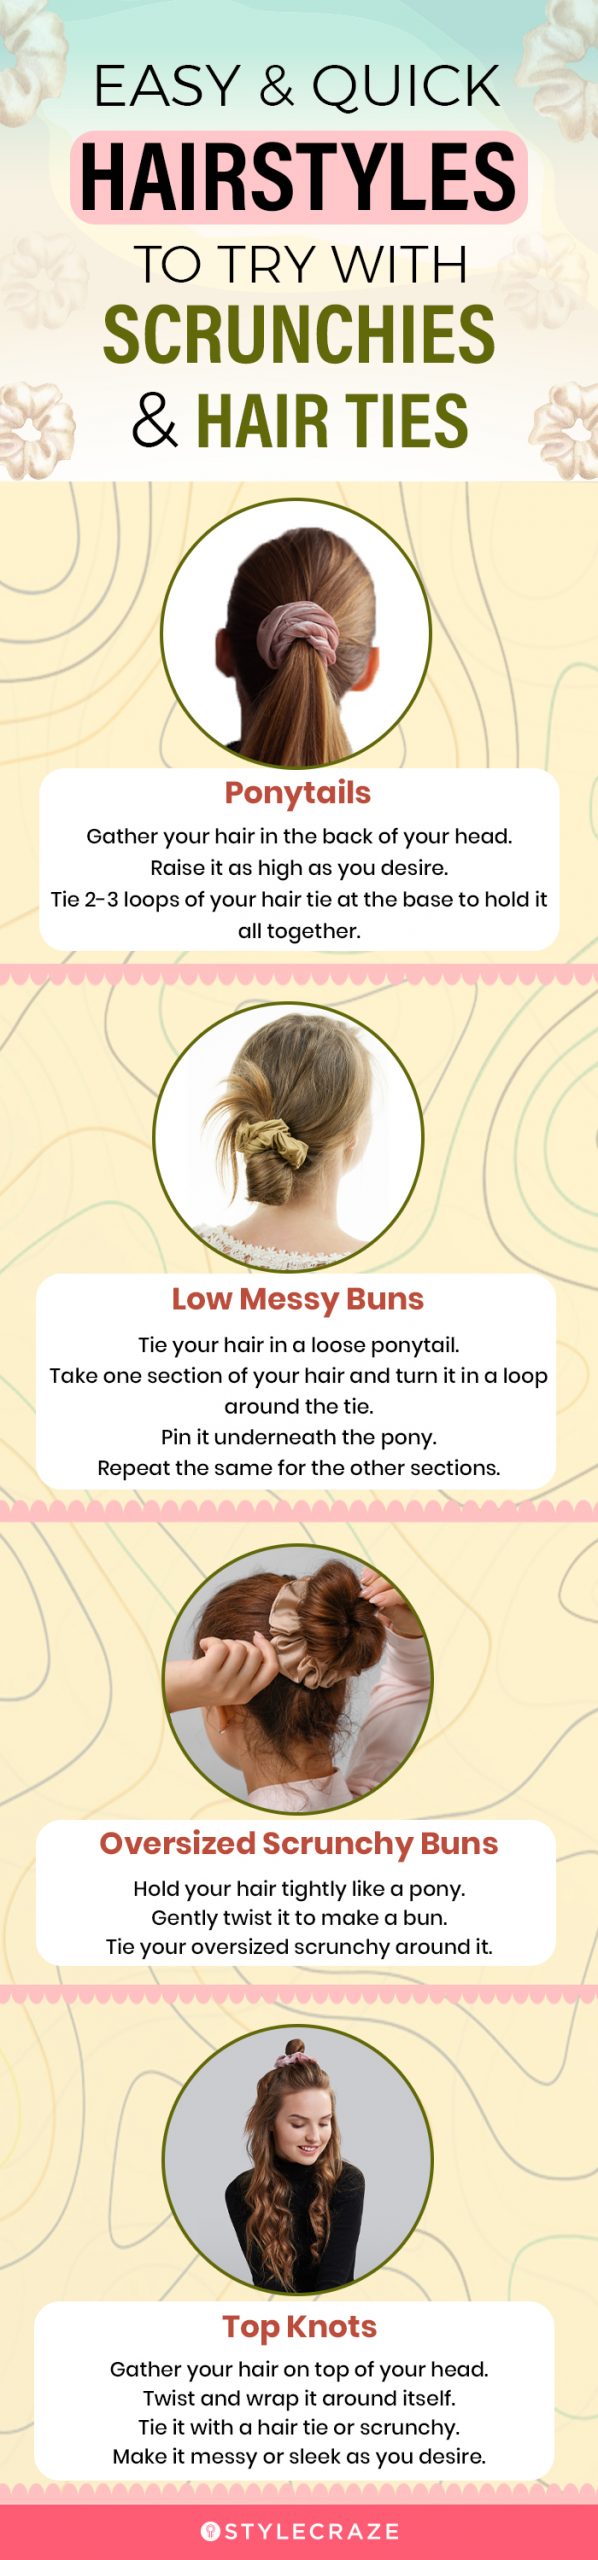 Easy & Quick Hairstyles To Try With Scrunchies & Hair Ties